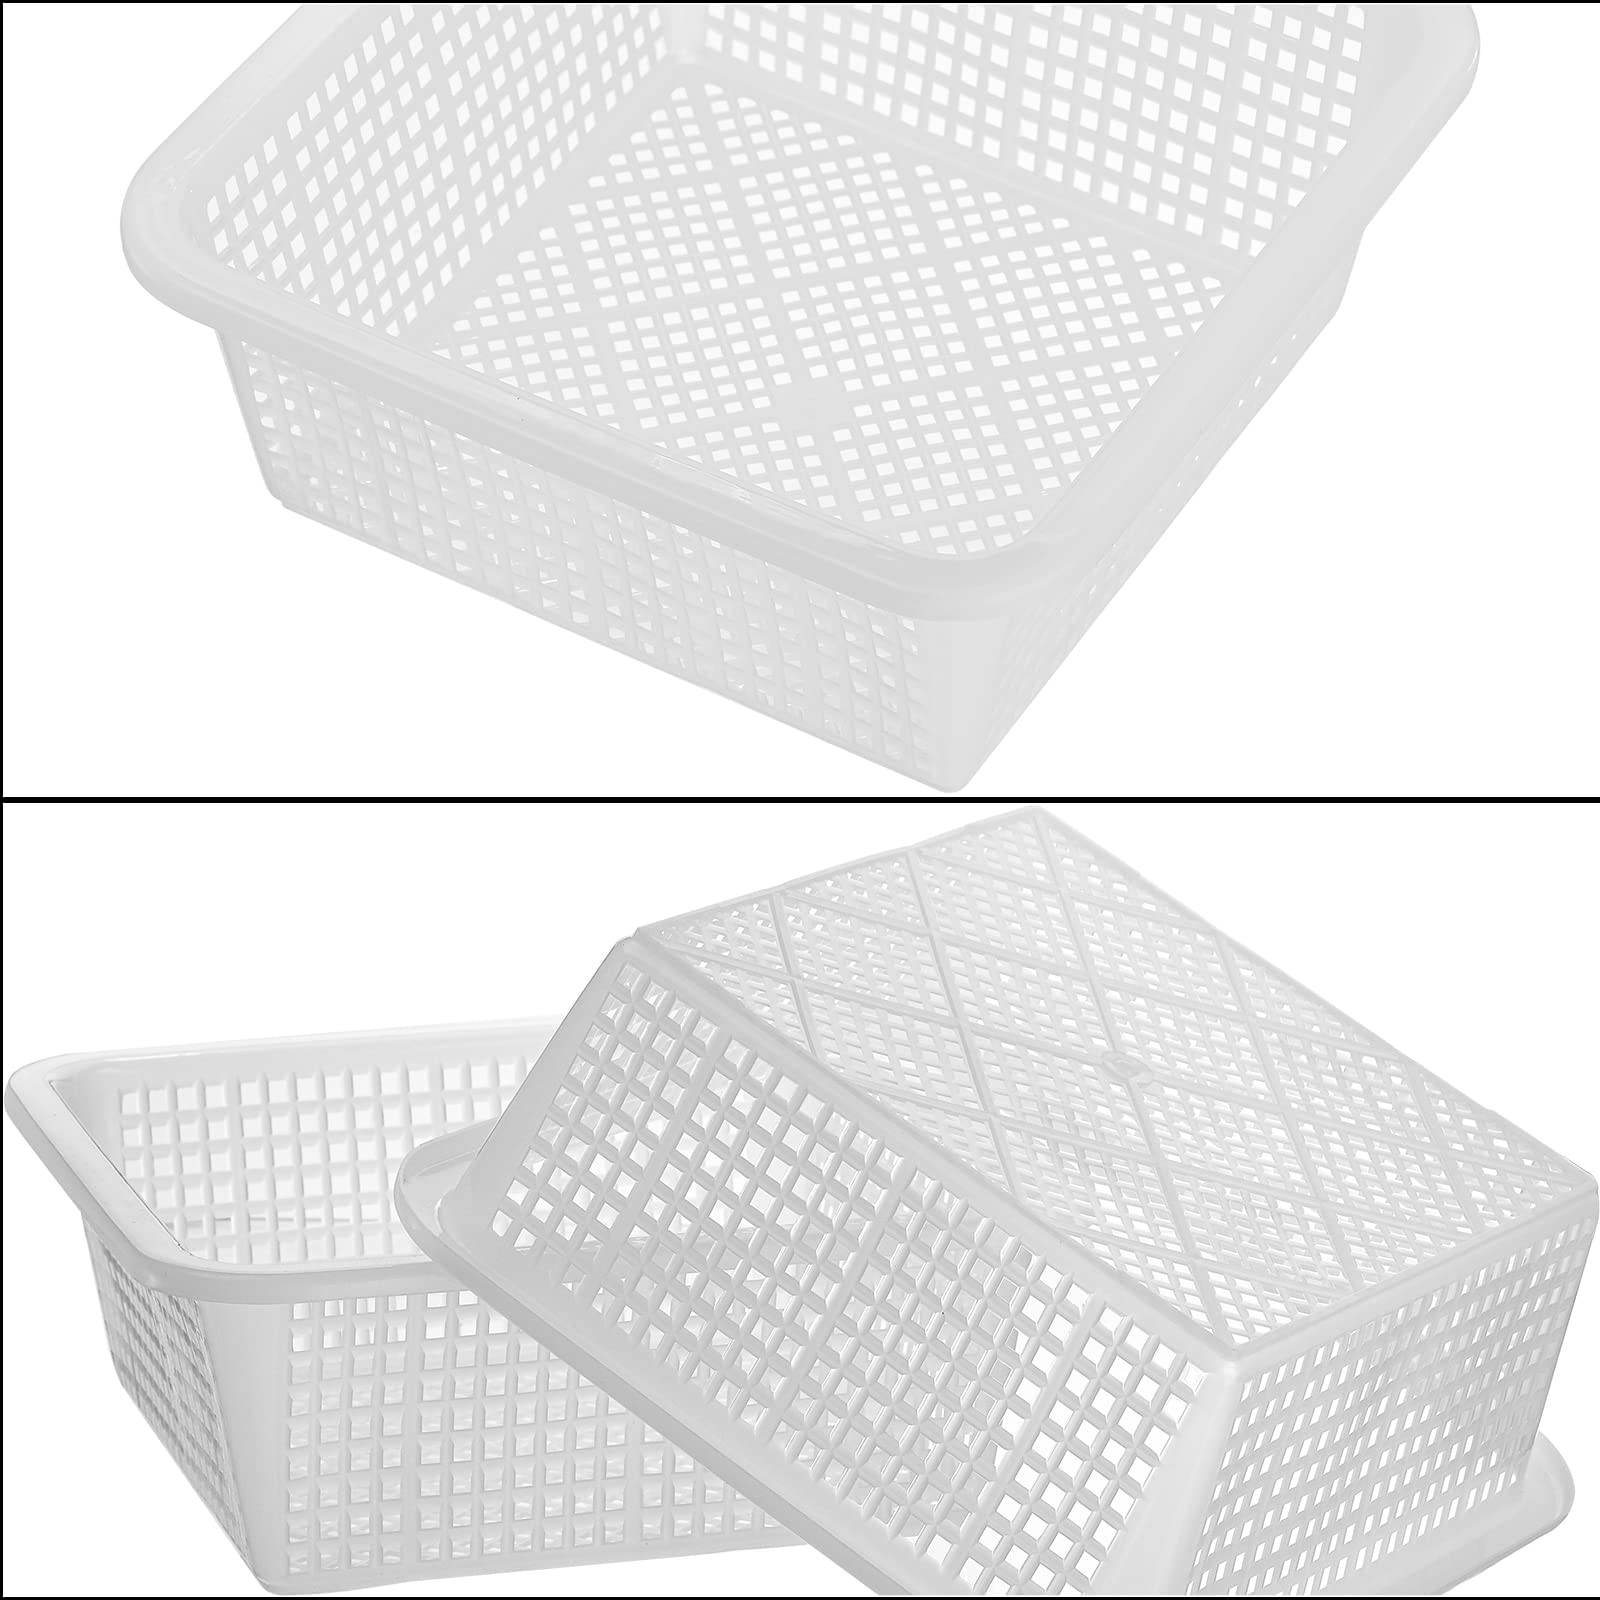 ZENFUN 24 Pieces Plastic White Storage Baskets, 3 Sizes Stackable Storage Bins Container Stationery, Small Tools, Cleaning Products, Space Saving